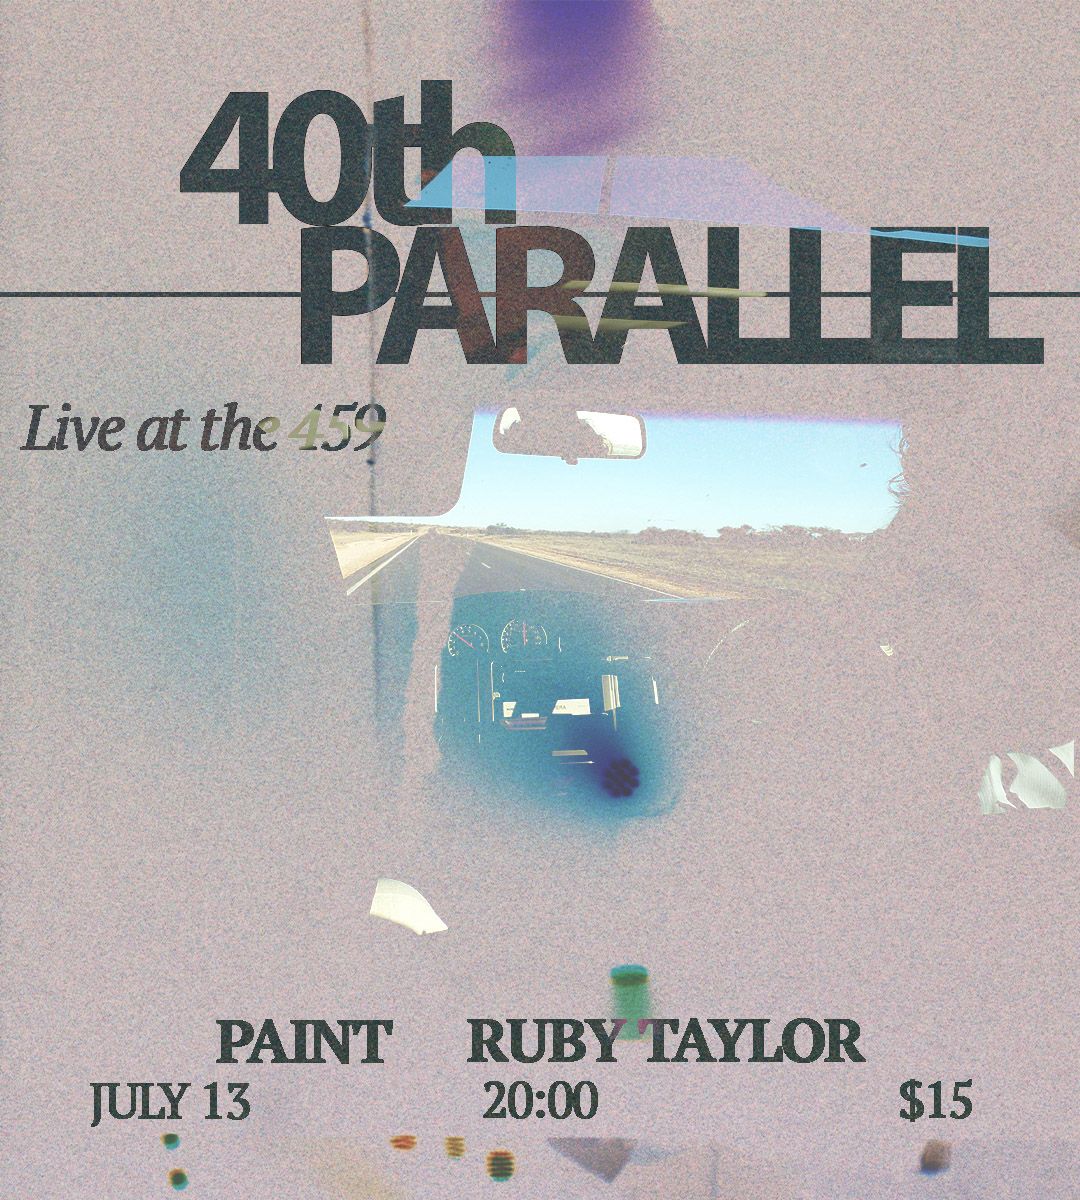 40th Parallel live at the 459